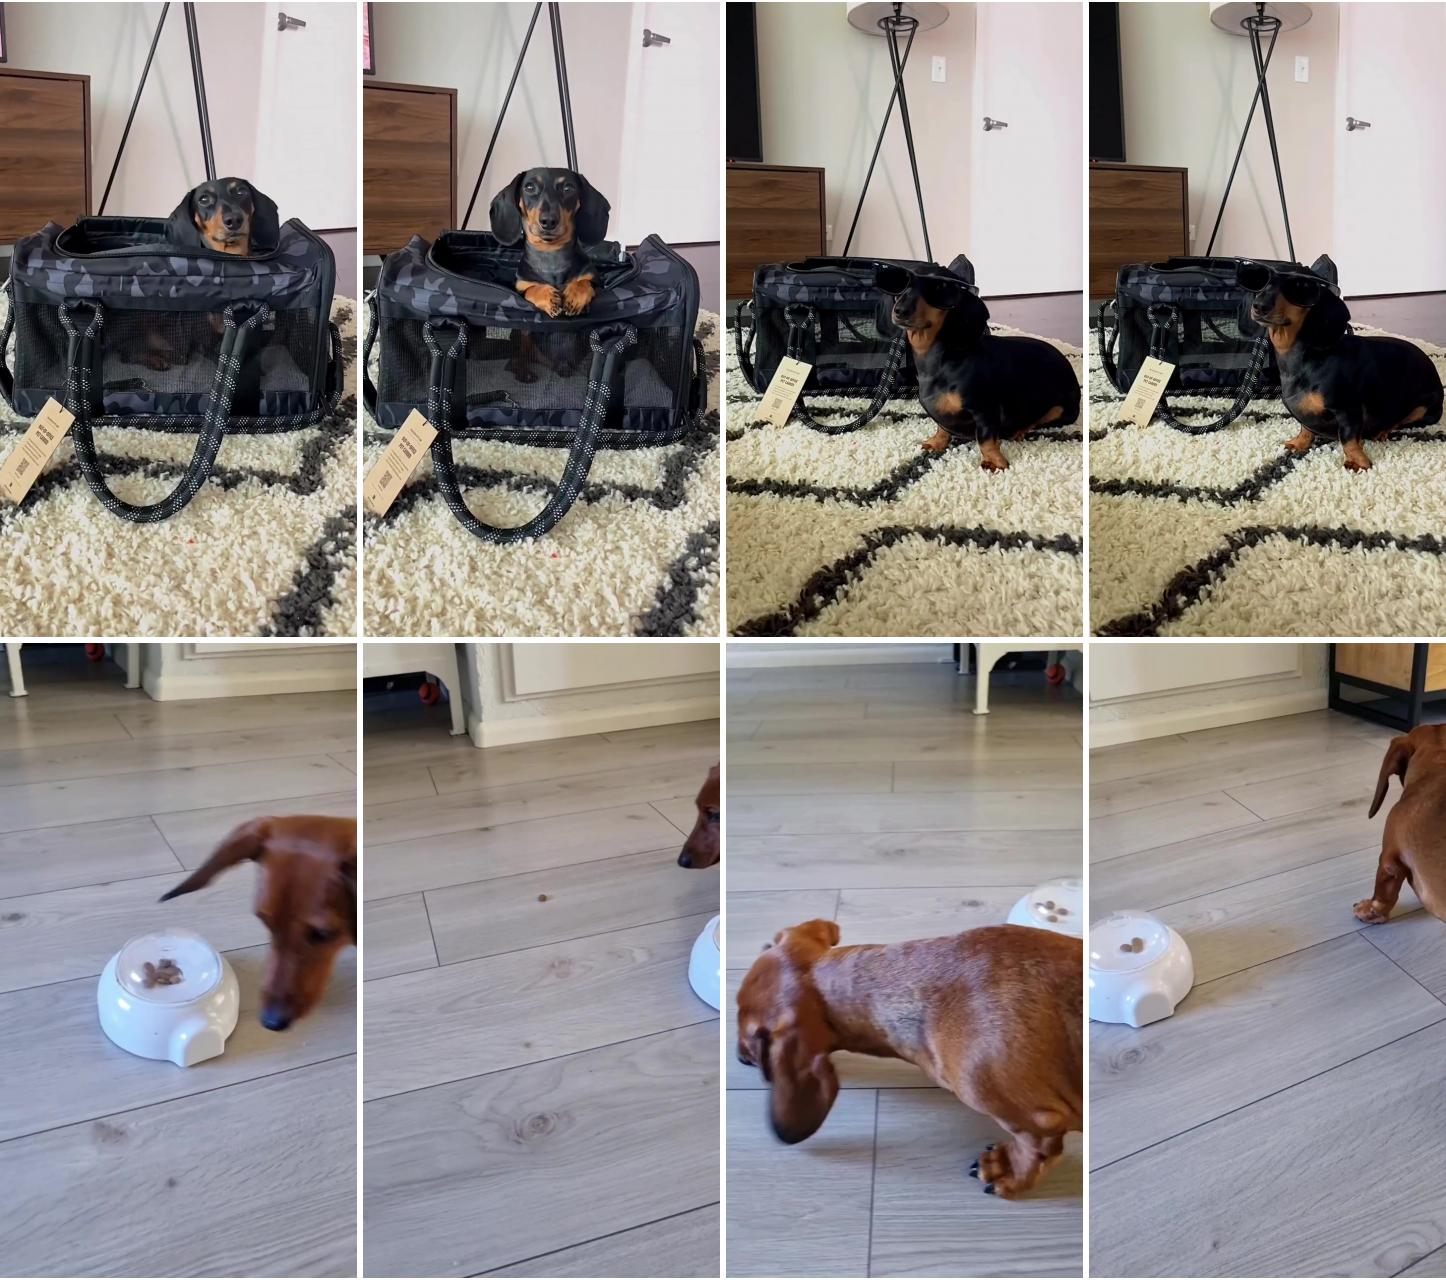 Dachshund videos; now that looks like a great toy 